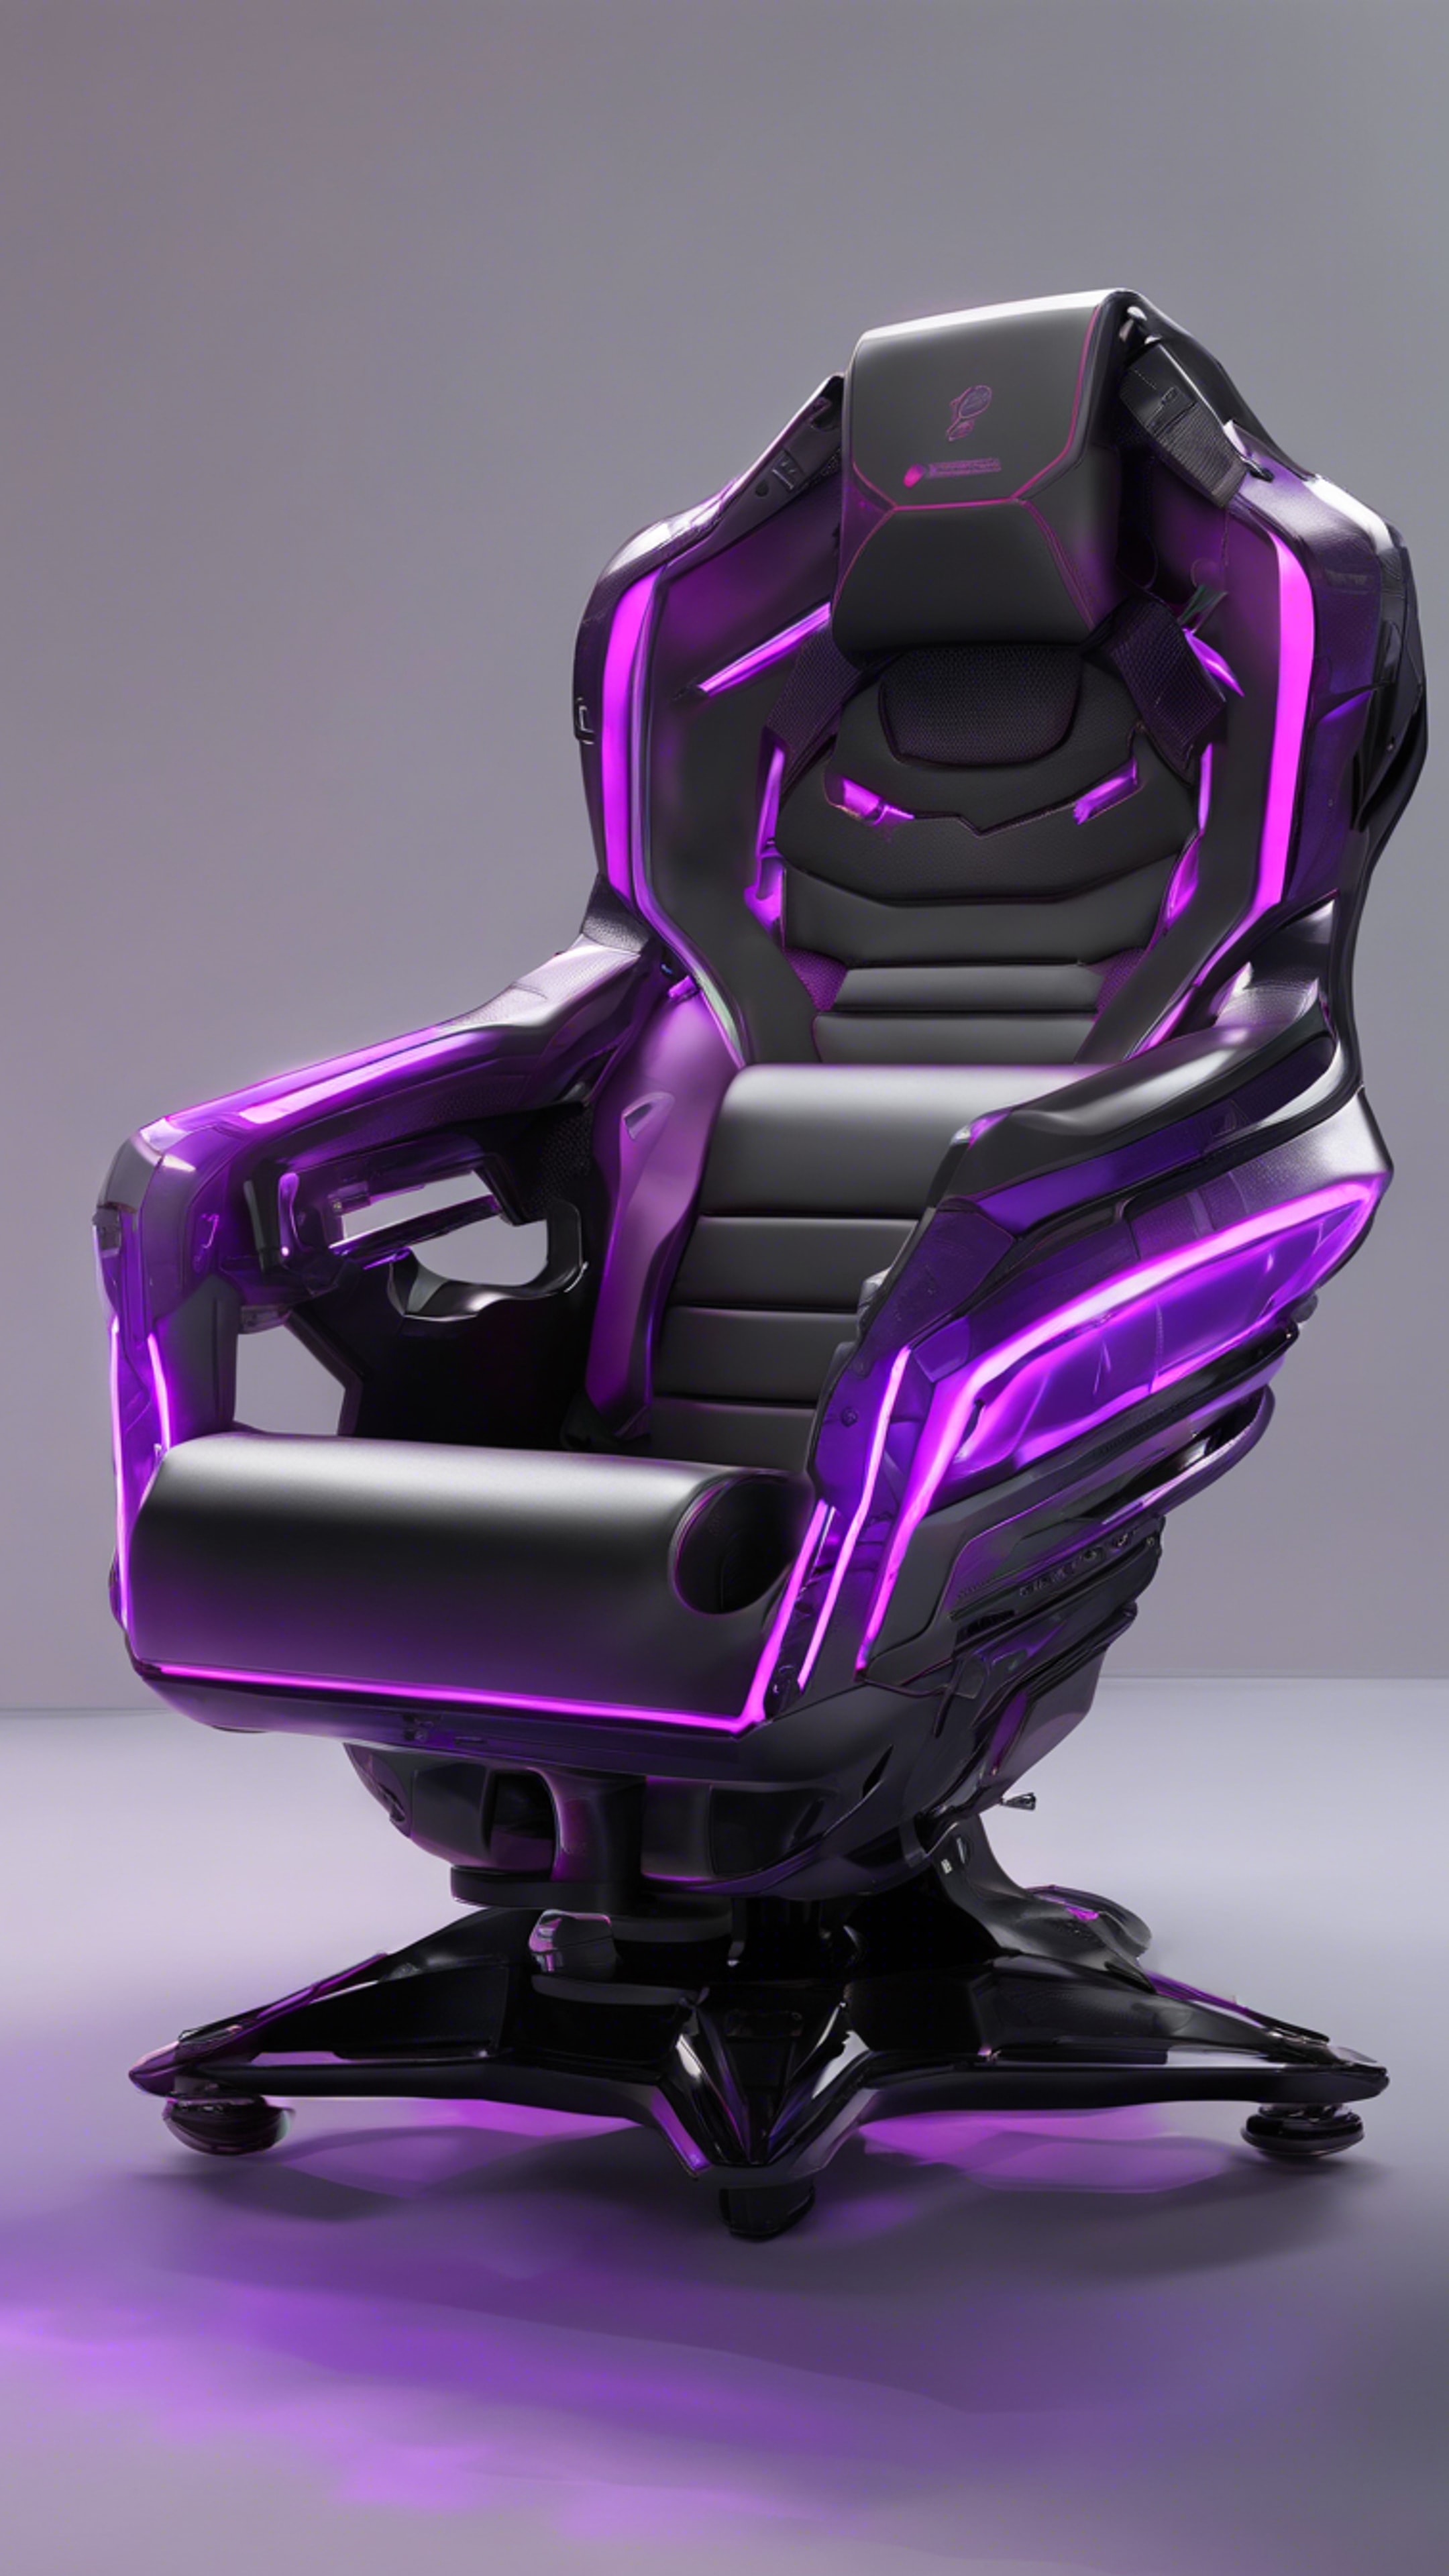 A futuristic gaming chair, jet black with neon purple accents, situated in a high-tech gaming station. Tapéta[77c4183ef08040e08e97]